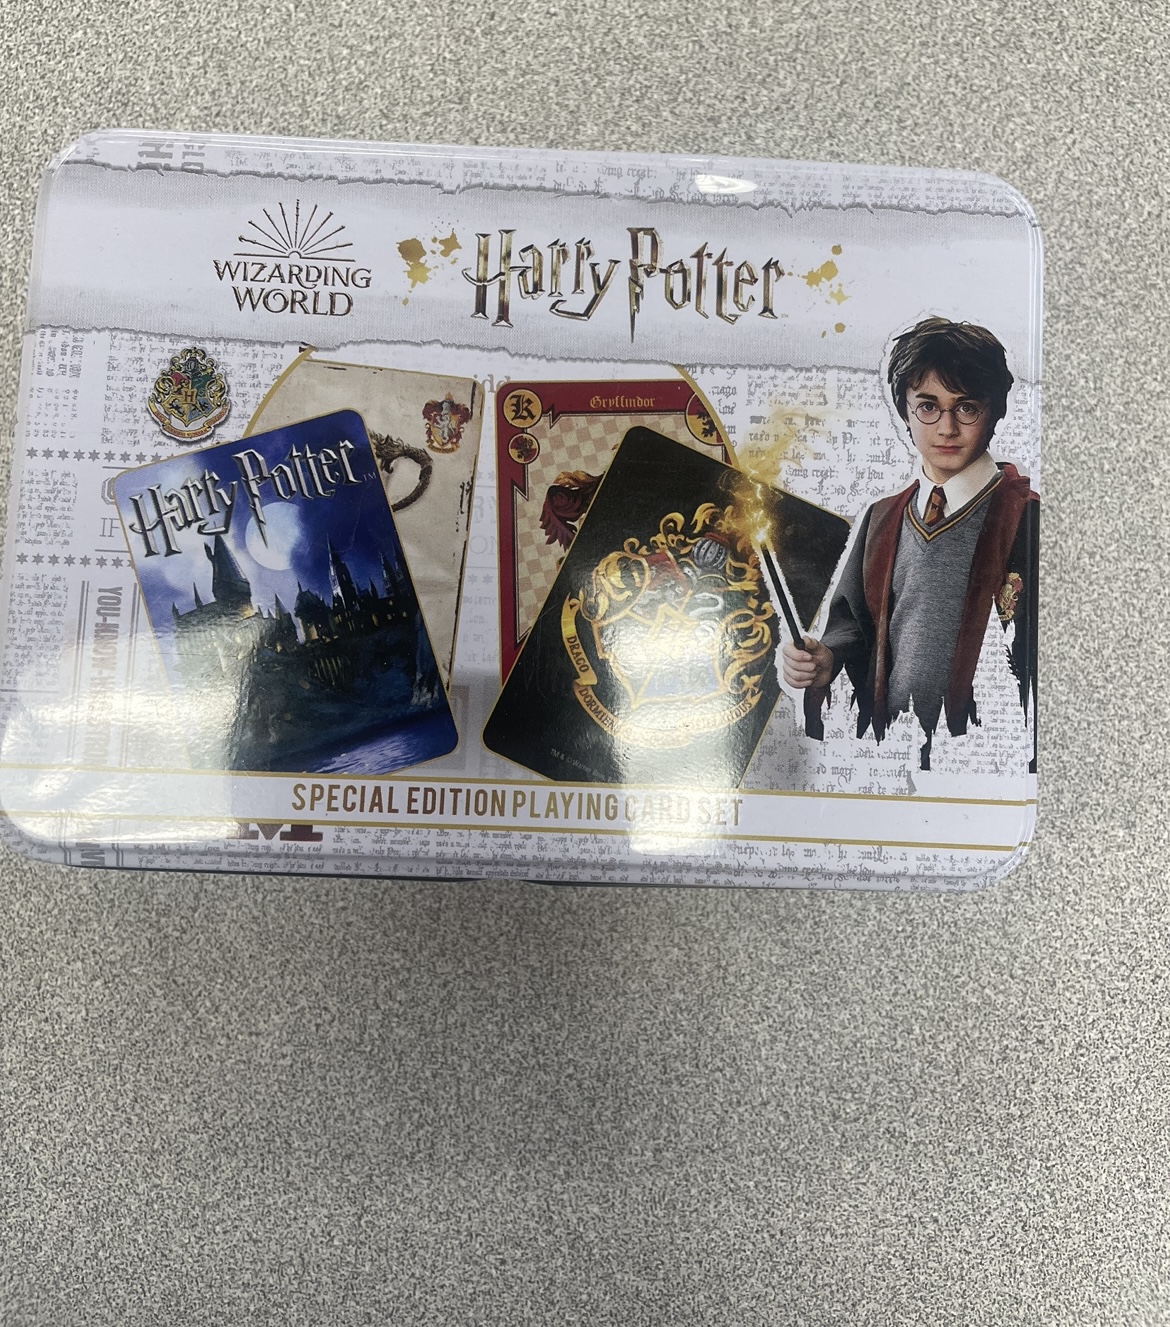 Mr.Towers Harry Potter cards that he does magic tricks with.